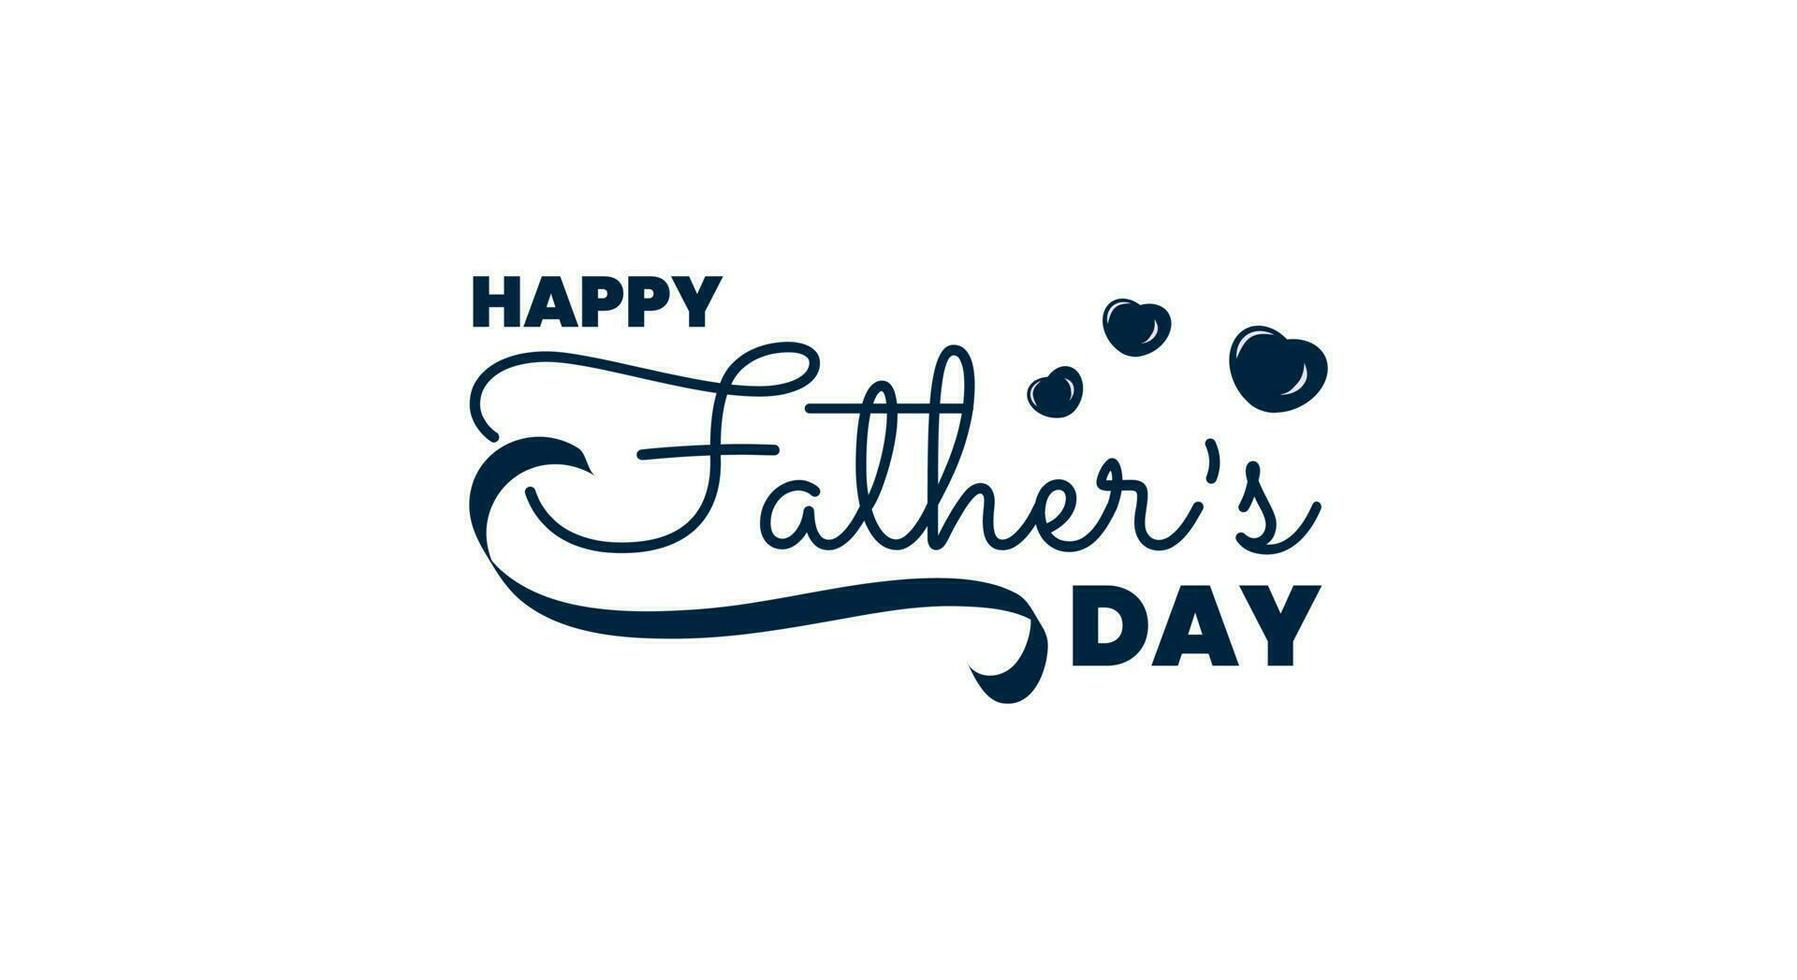 Happy Father's Day greeting design. Lettering for card, poster, banner elements vector